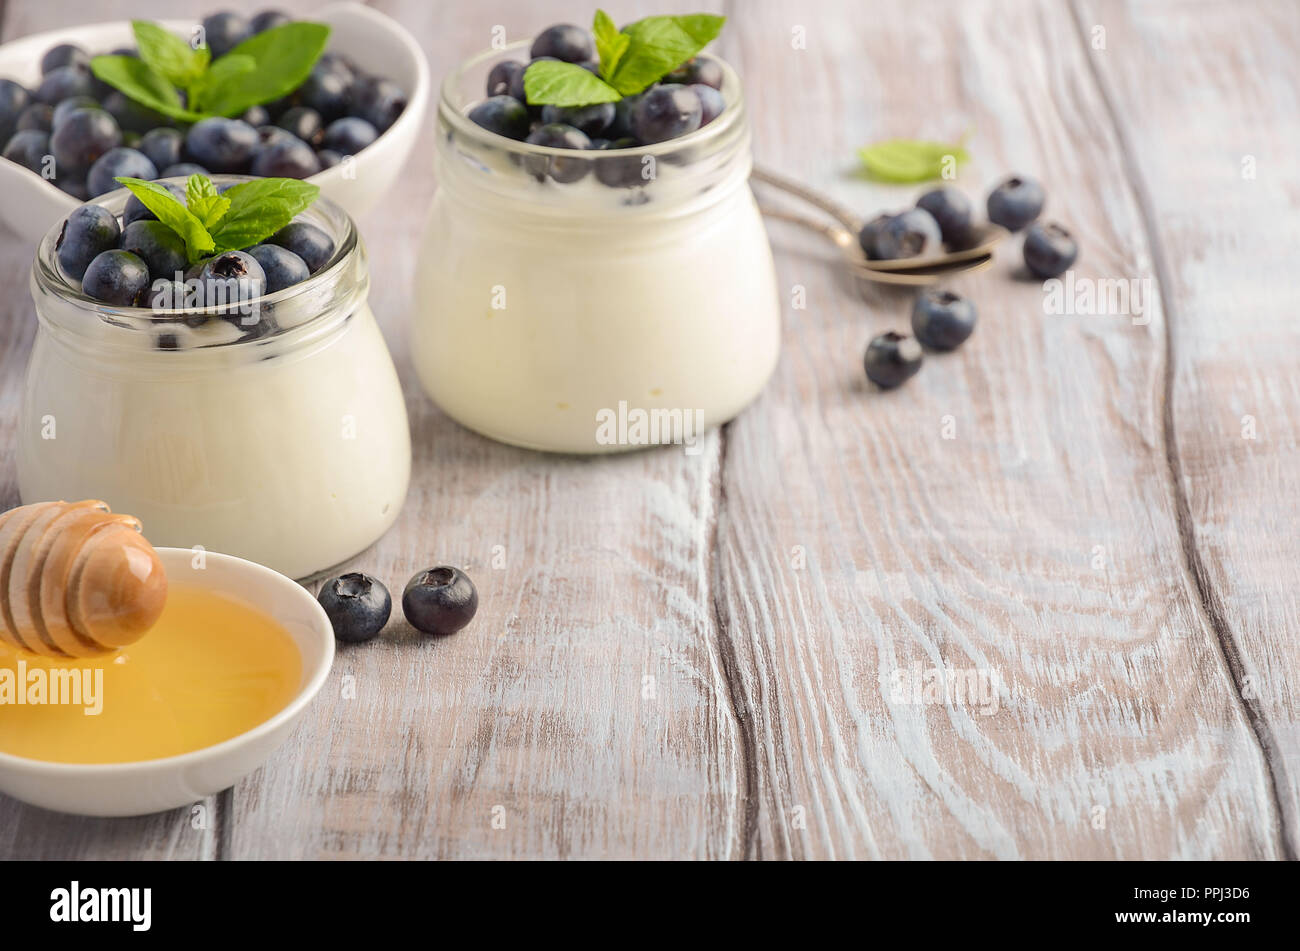 Homemade natural yogurt with blueberries and mint. Stock Photo